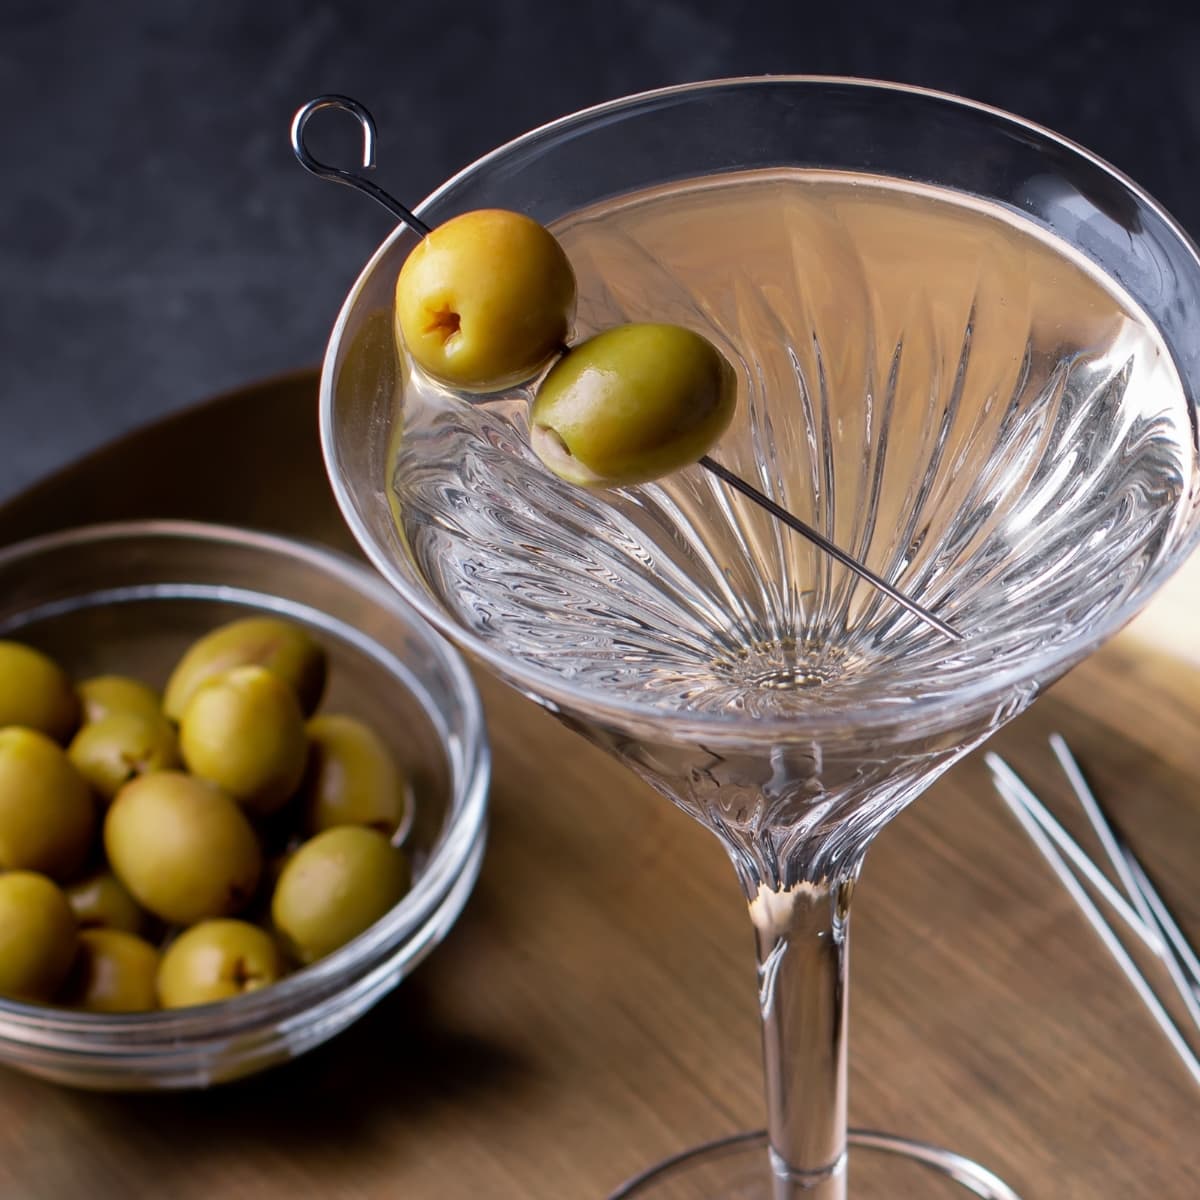 Top View of a Glass of Dirty Martini Cocktail Garnished With Olives